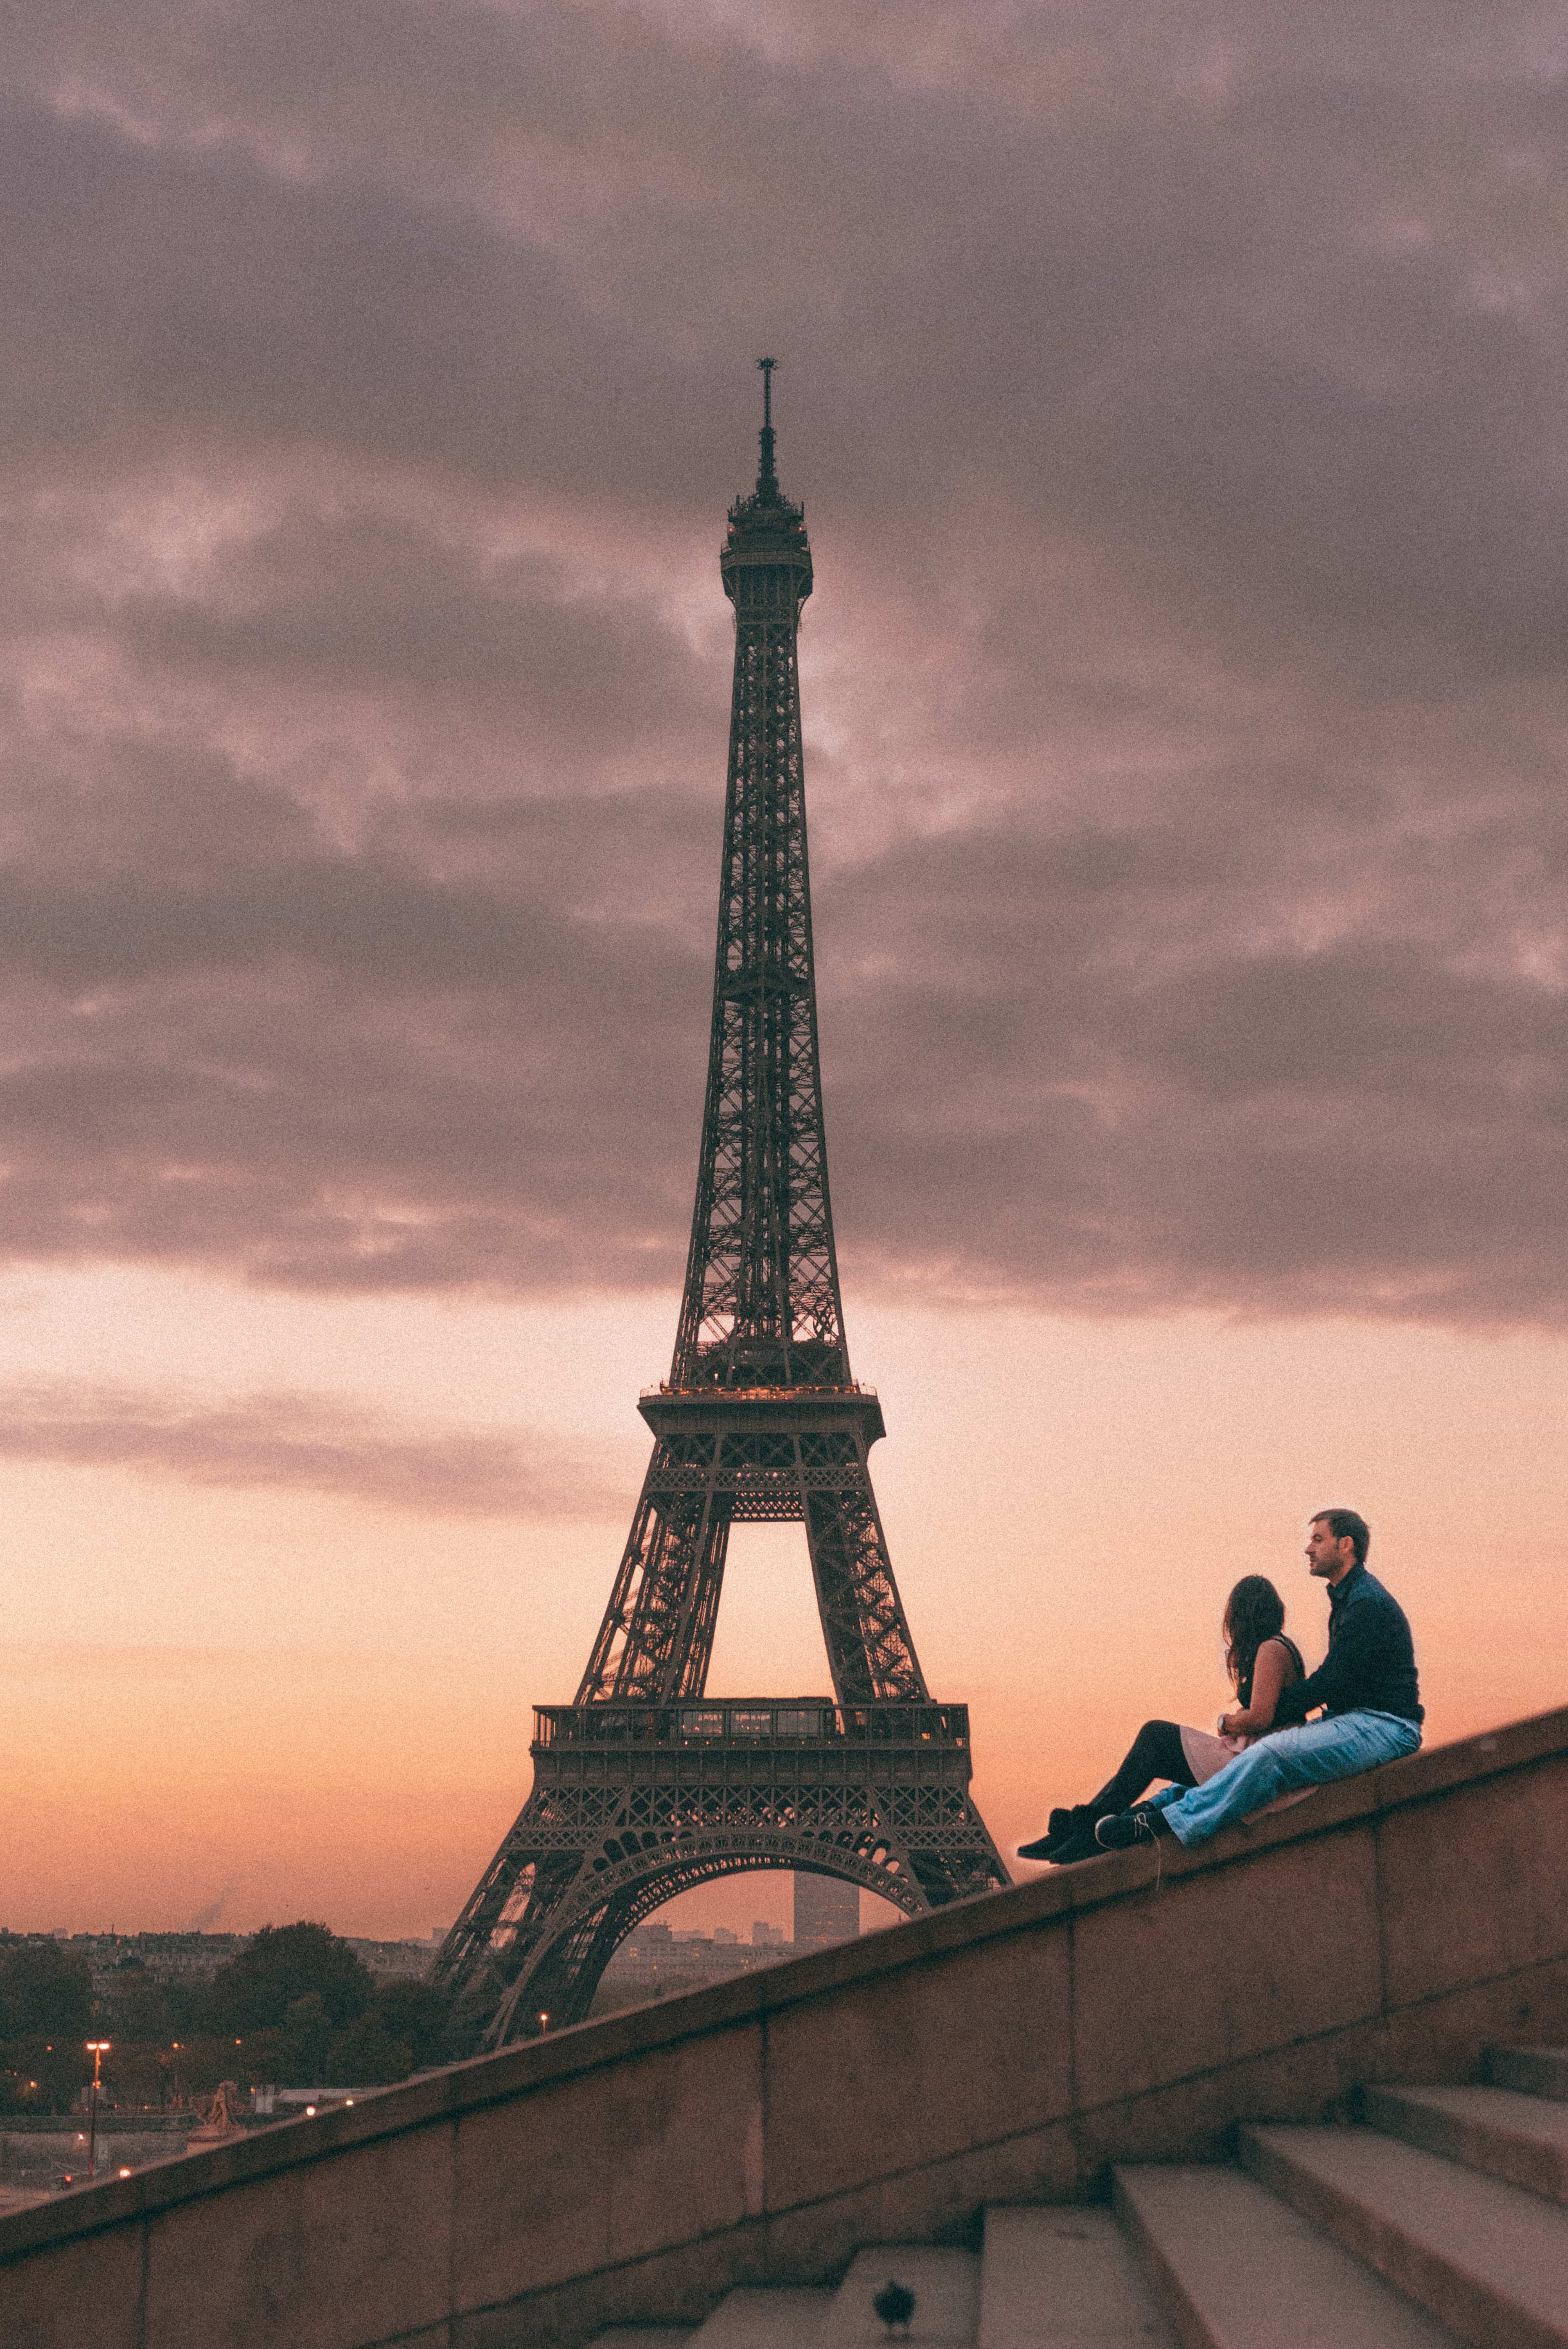 Instagrammable places in Paris, Eiffel Tower, Thrifty Tips for Booking a Short Break This Winter